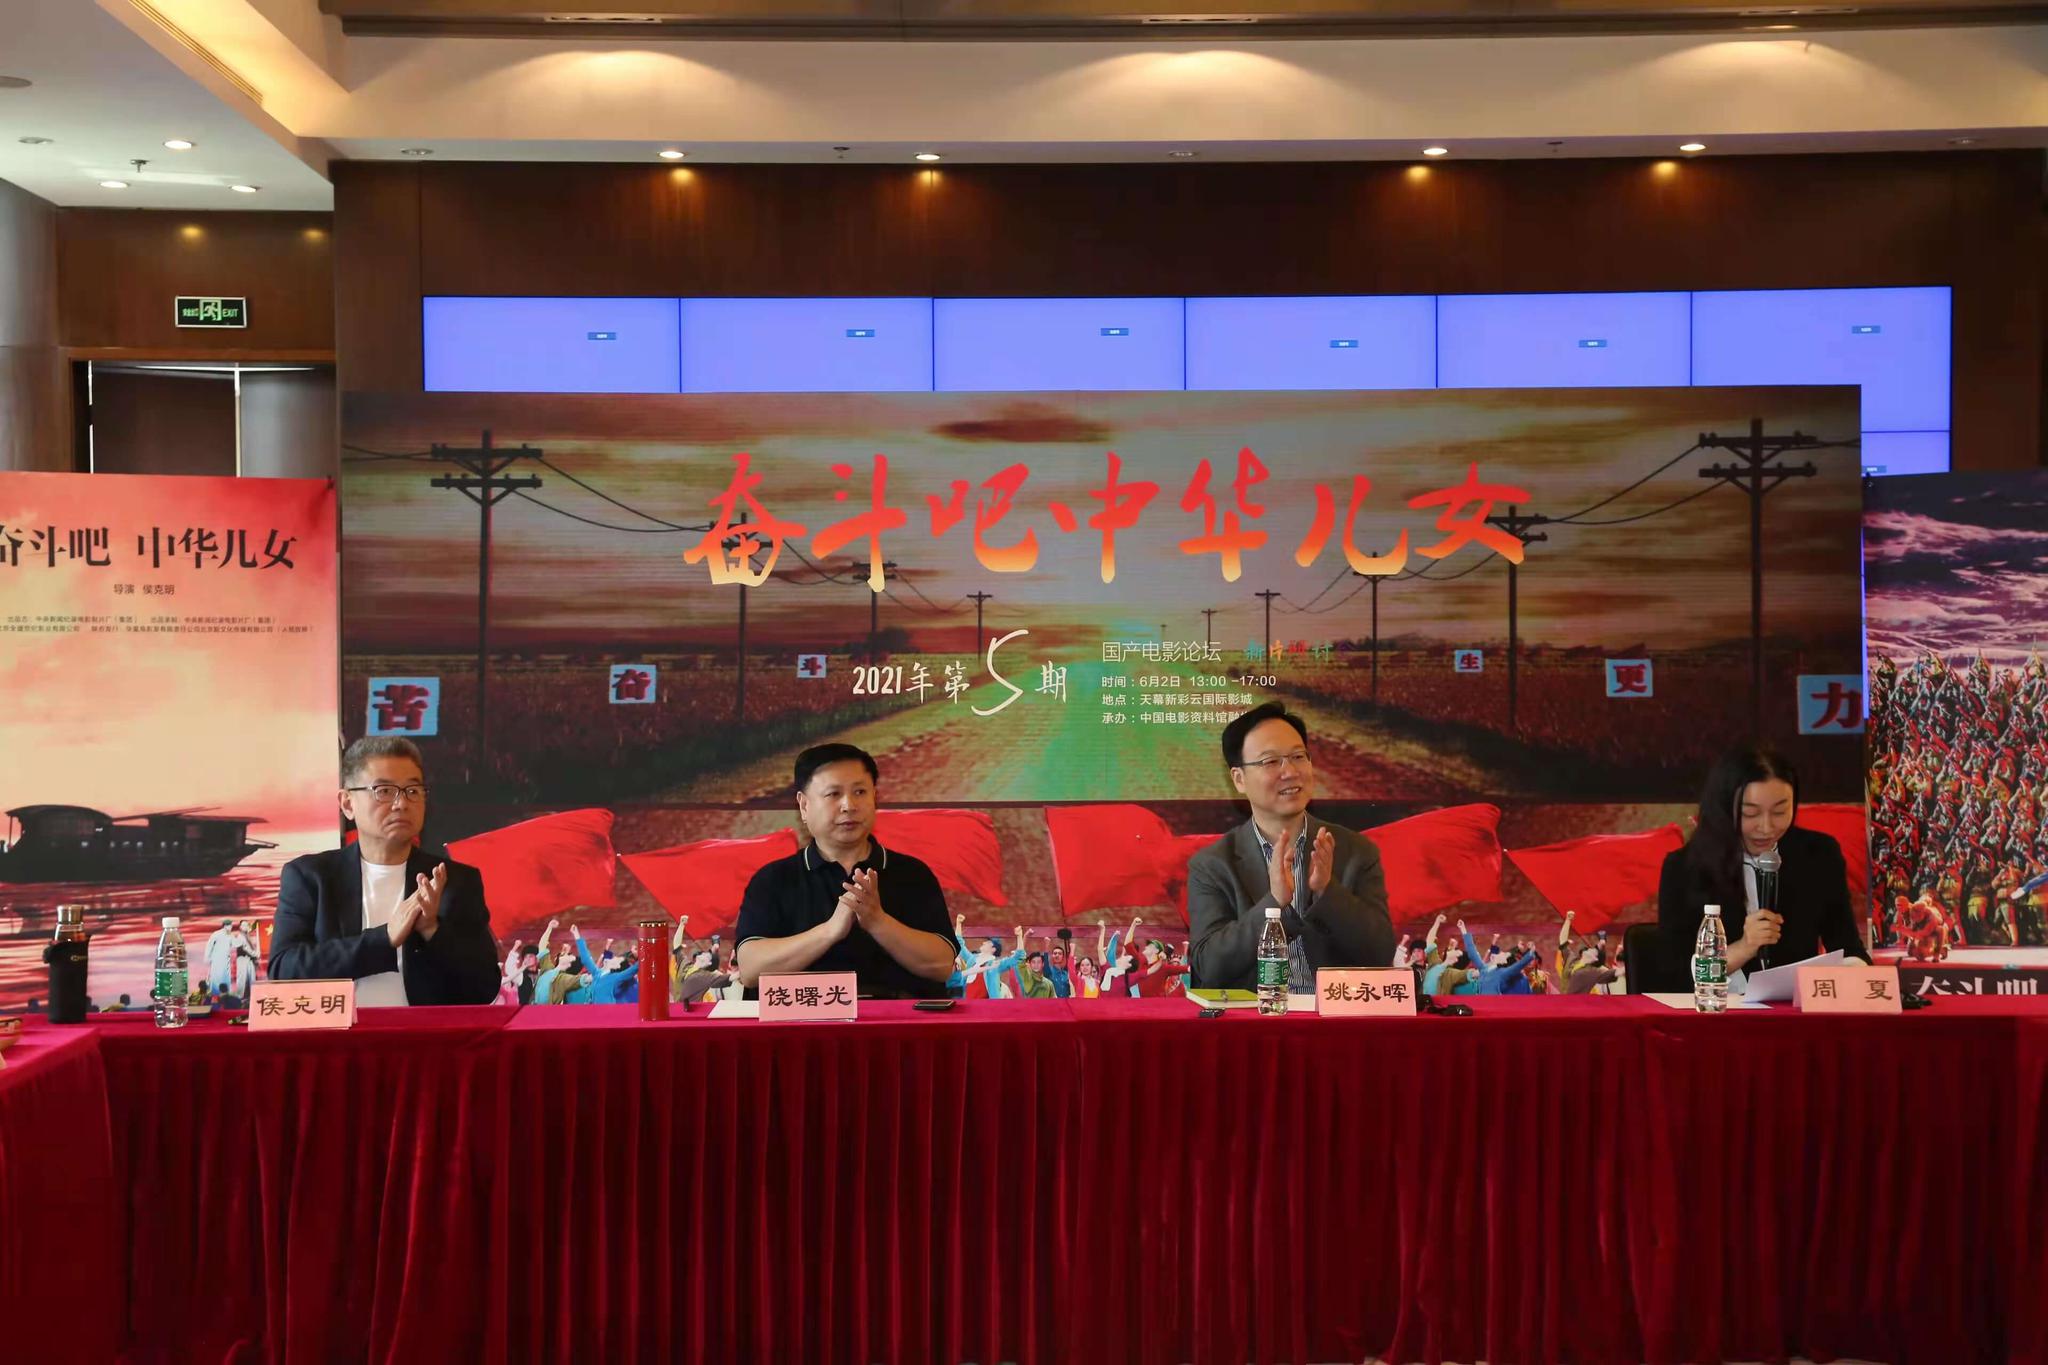 △Yao Yonghui, deputy secretary and general manager of the Central New Film Group; Hou Keming, the chief director of the film, and Rao Shuguang, president of the China Film Critics Society, gave speeches at the seminar